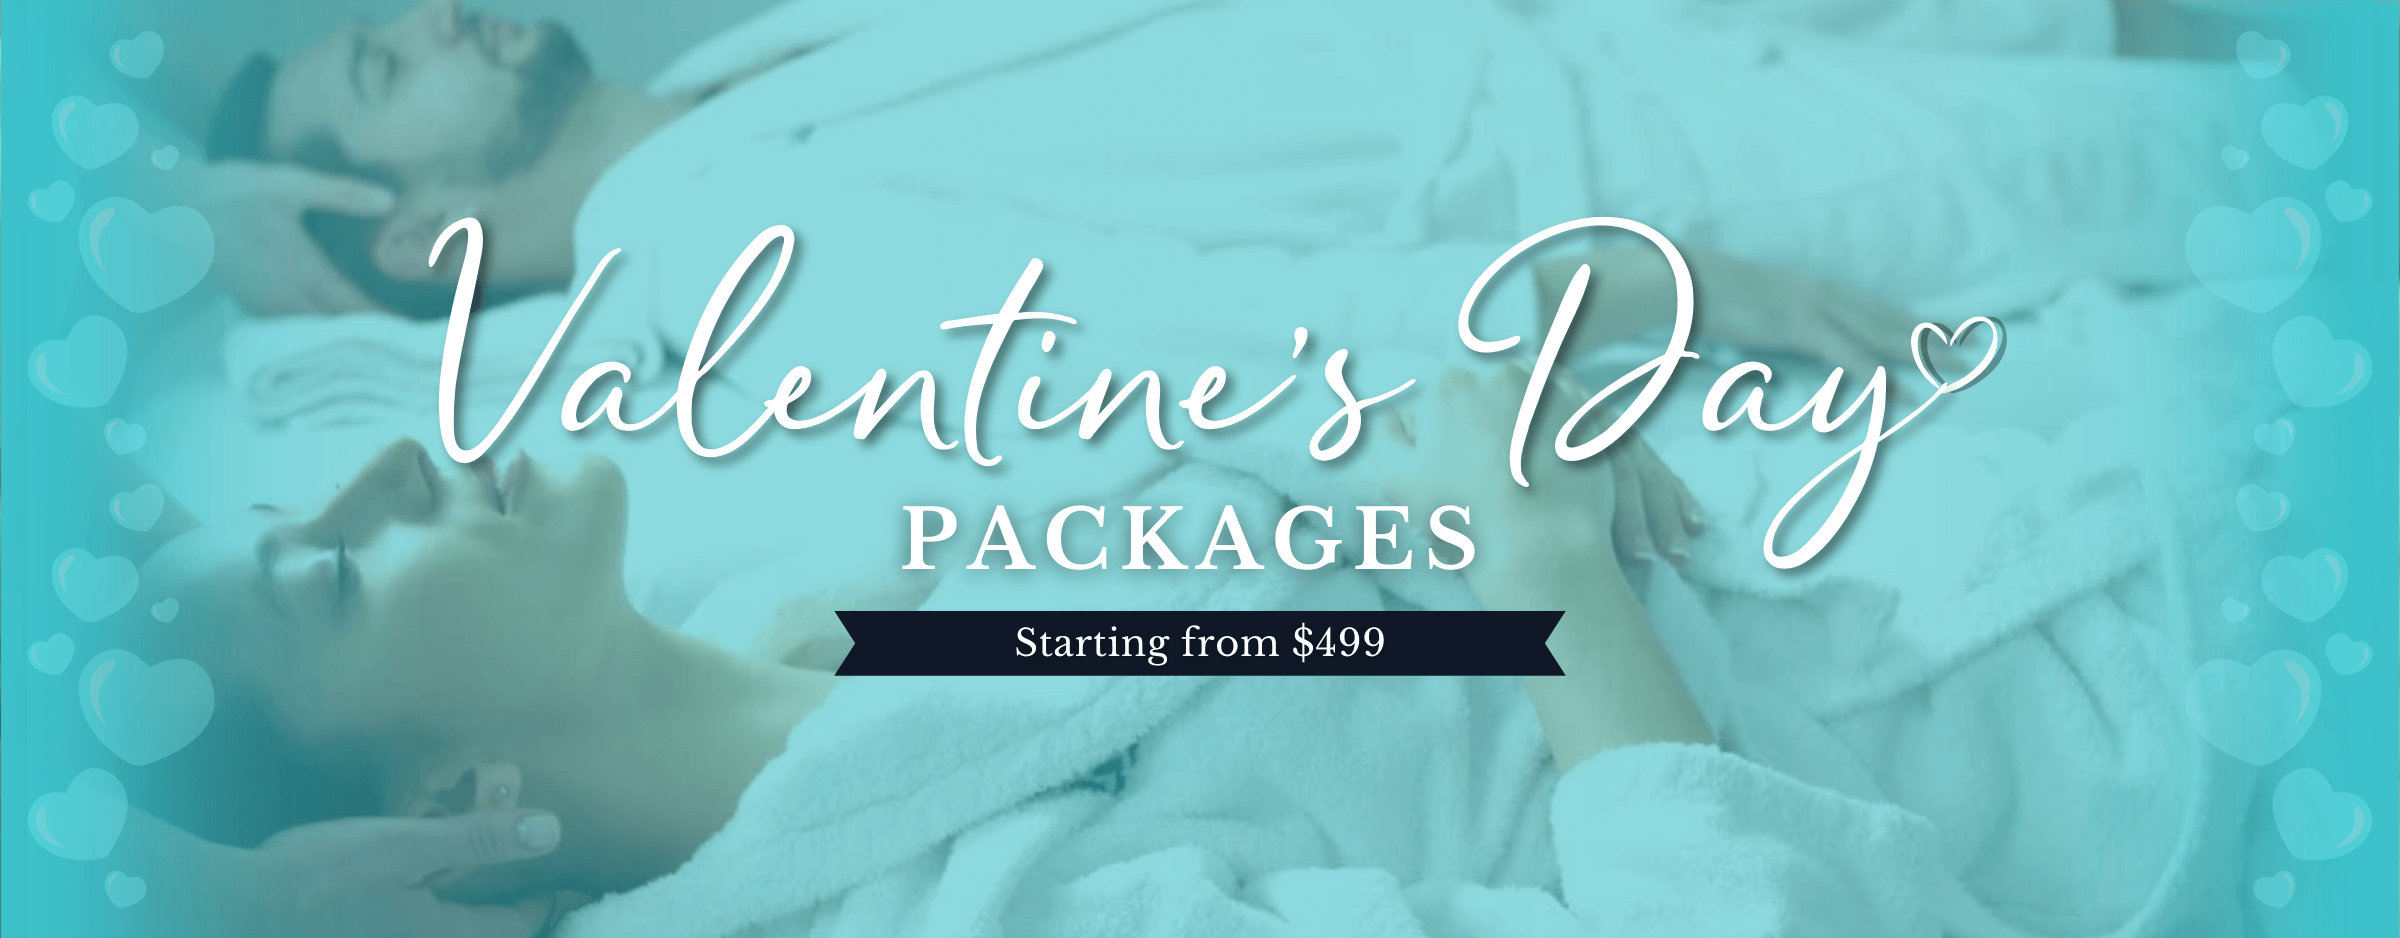 Valentines Day Packages